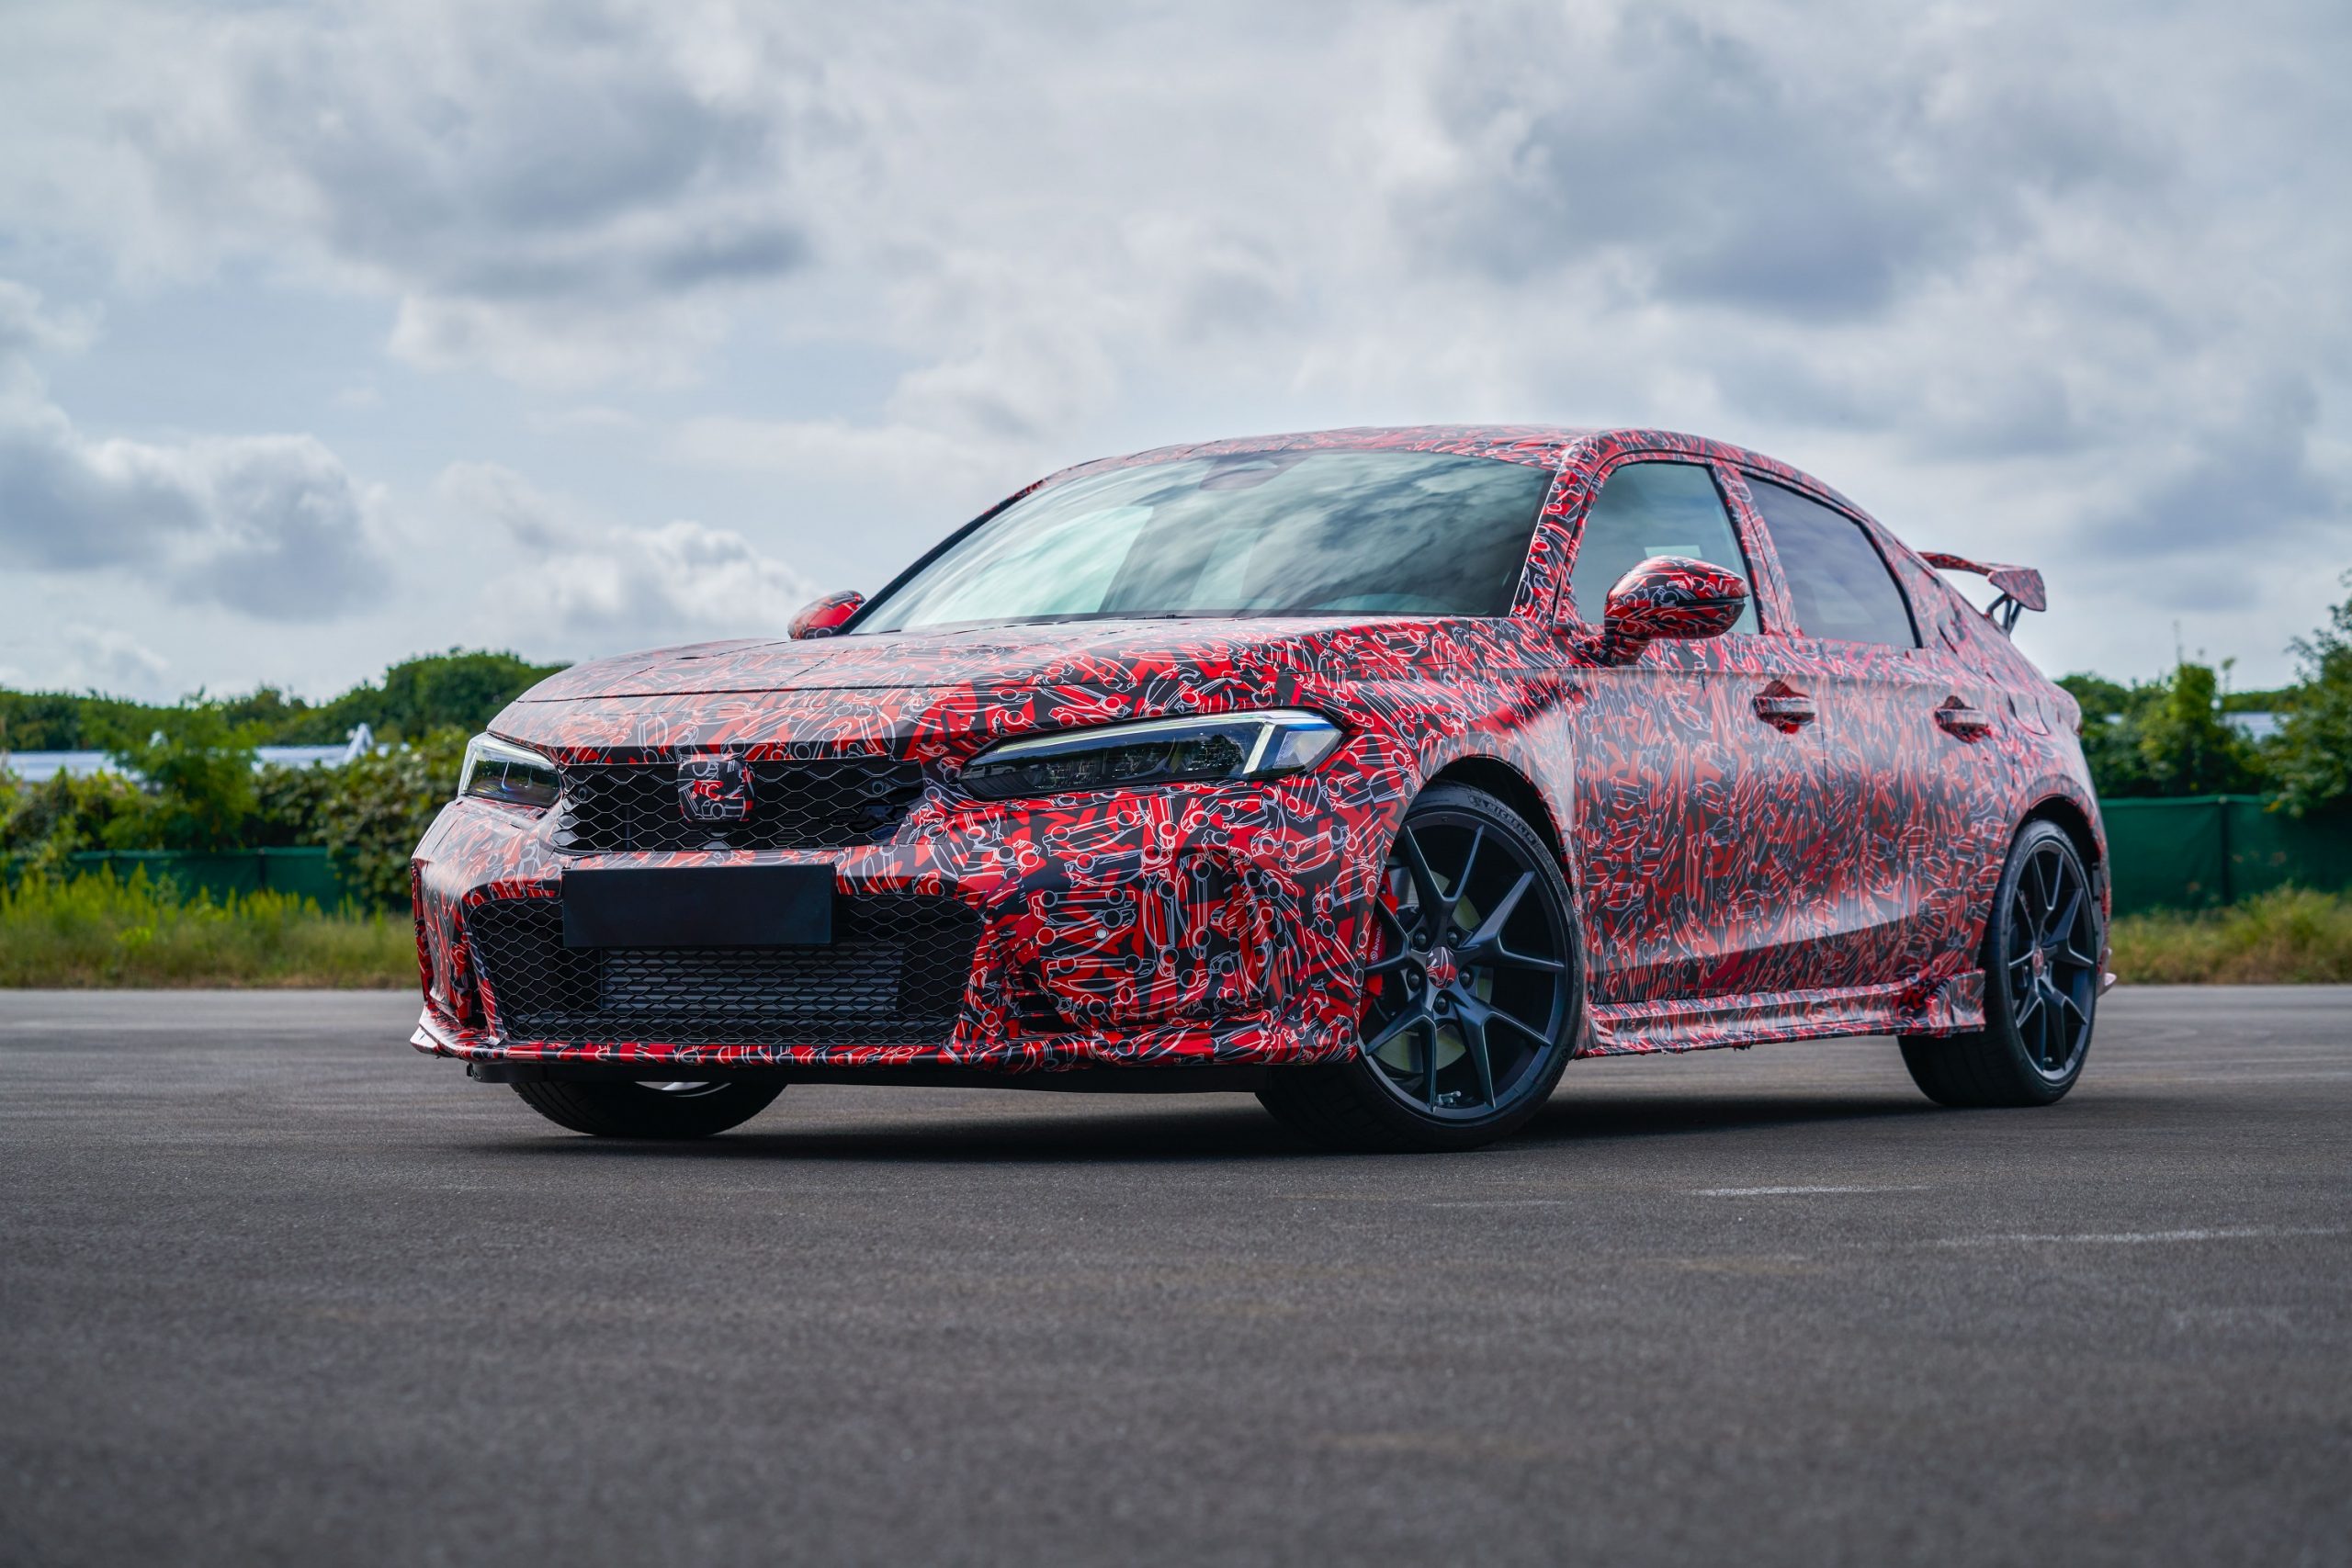 The camo liveried 2023 Honda Civic Type R shot from the front 3/4 at the Nurburgring